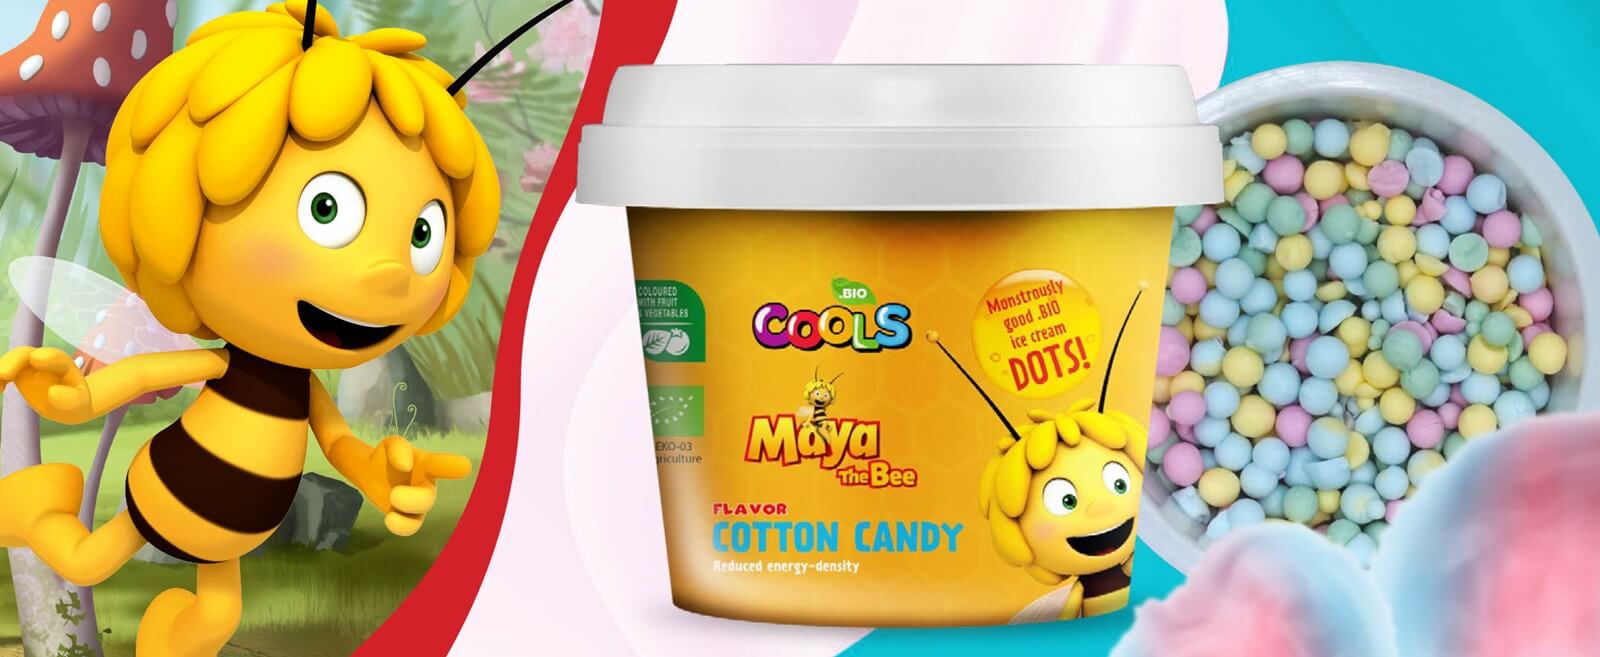 Planeta Junior and Cools Group ink a deal to launch Maya the Bee bio ice  creams in Poland - Licensing International